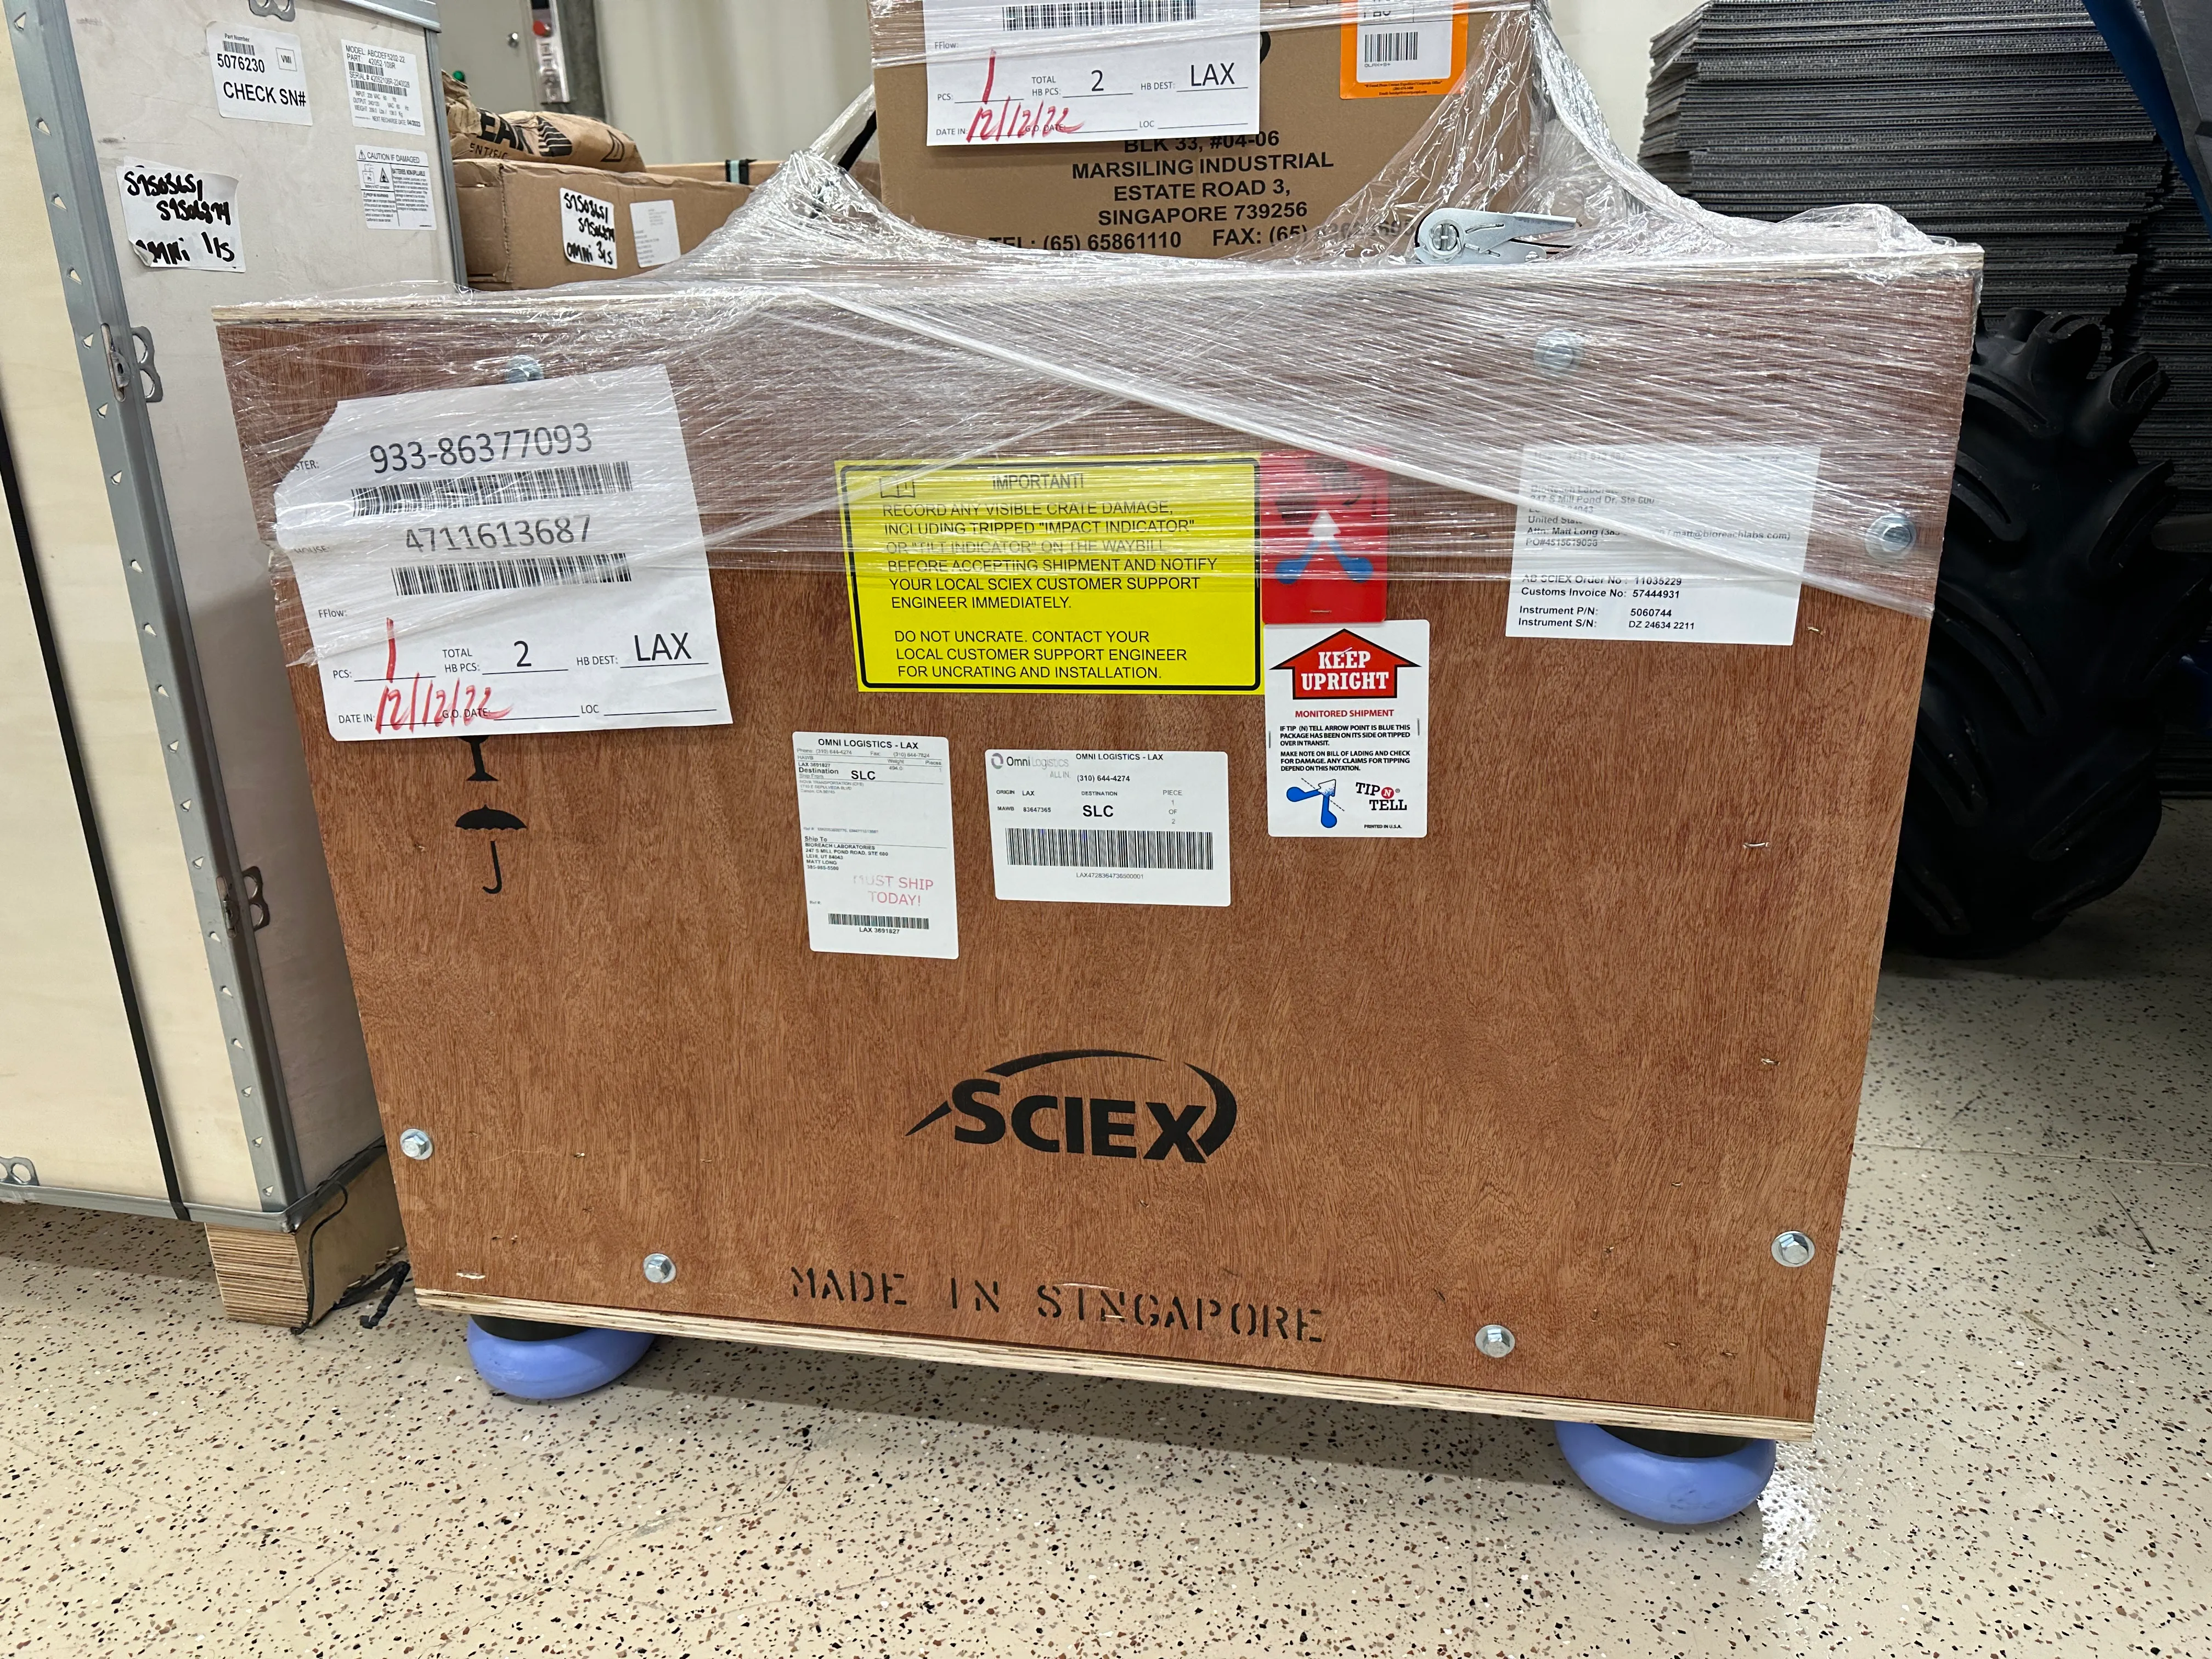 BRAND NEW Sciex 6500+ COMPLETE system, new in box, with warranty from SCIEX.